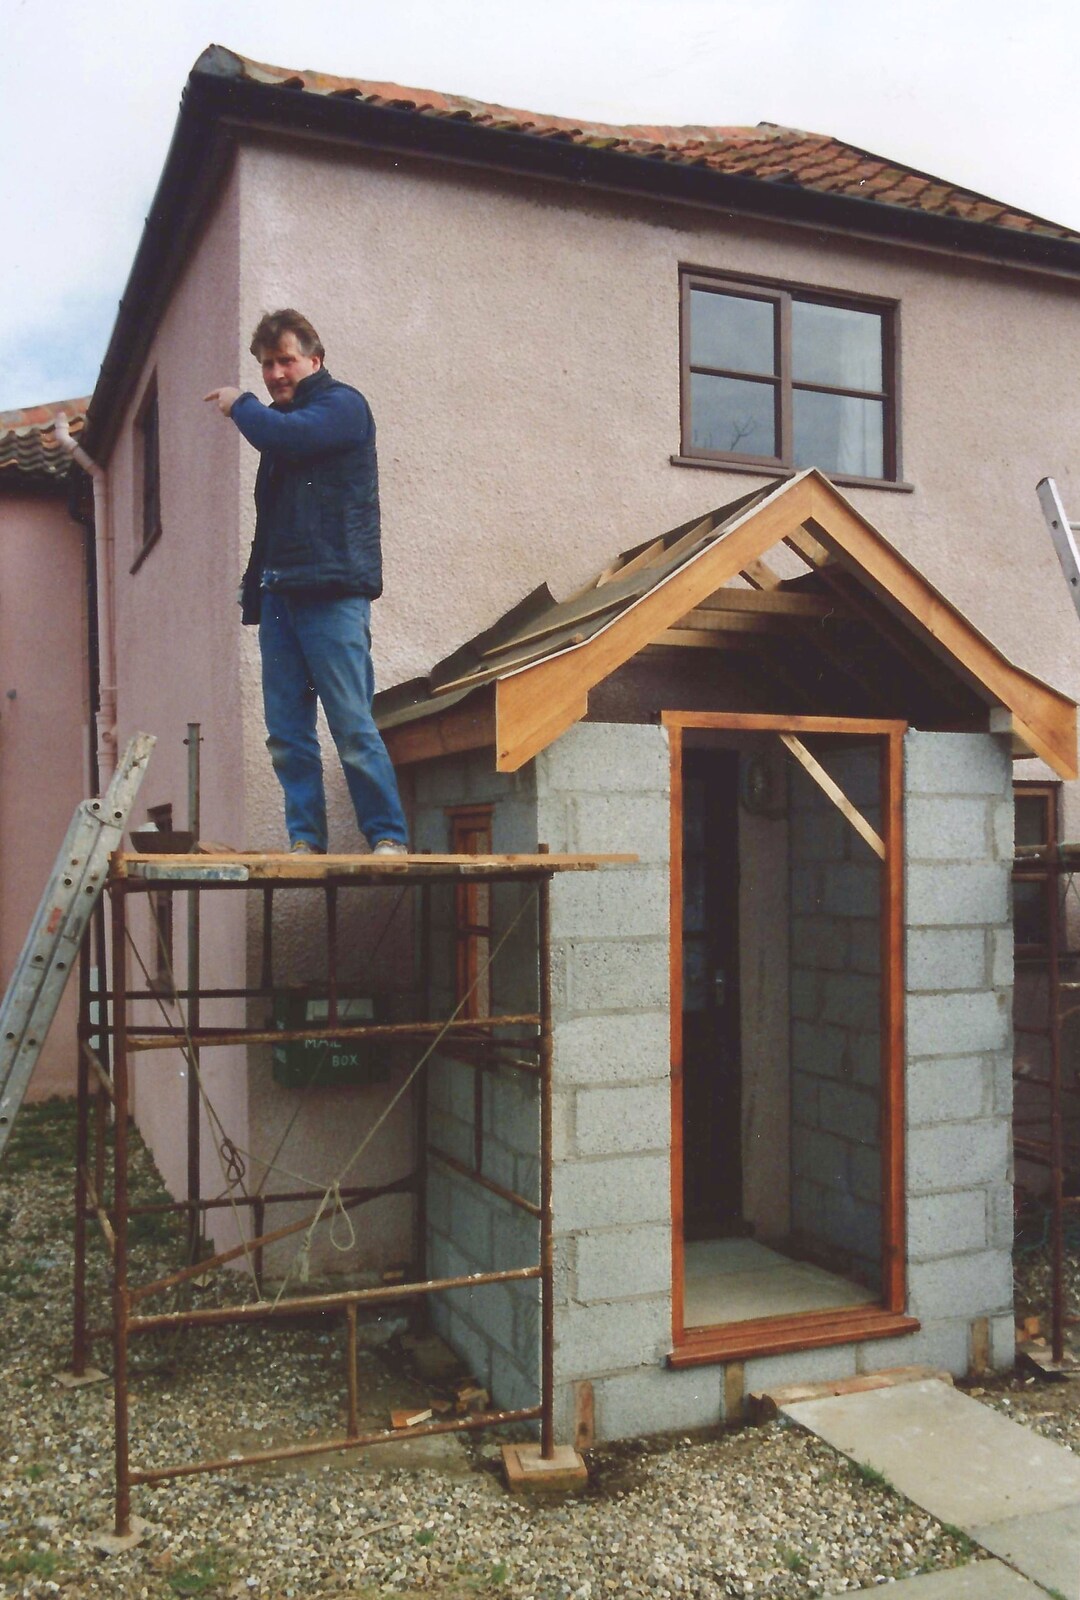 Bernie stands on scaffolding an points from Bernie and the Porch, The Stables, Stuston, Suffolk - 15th March 1991